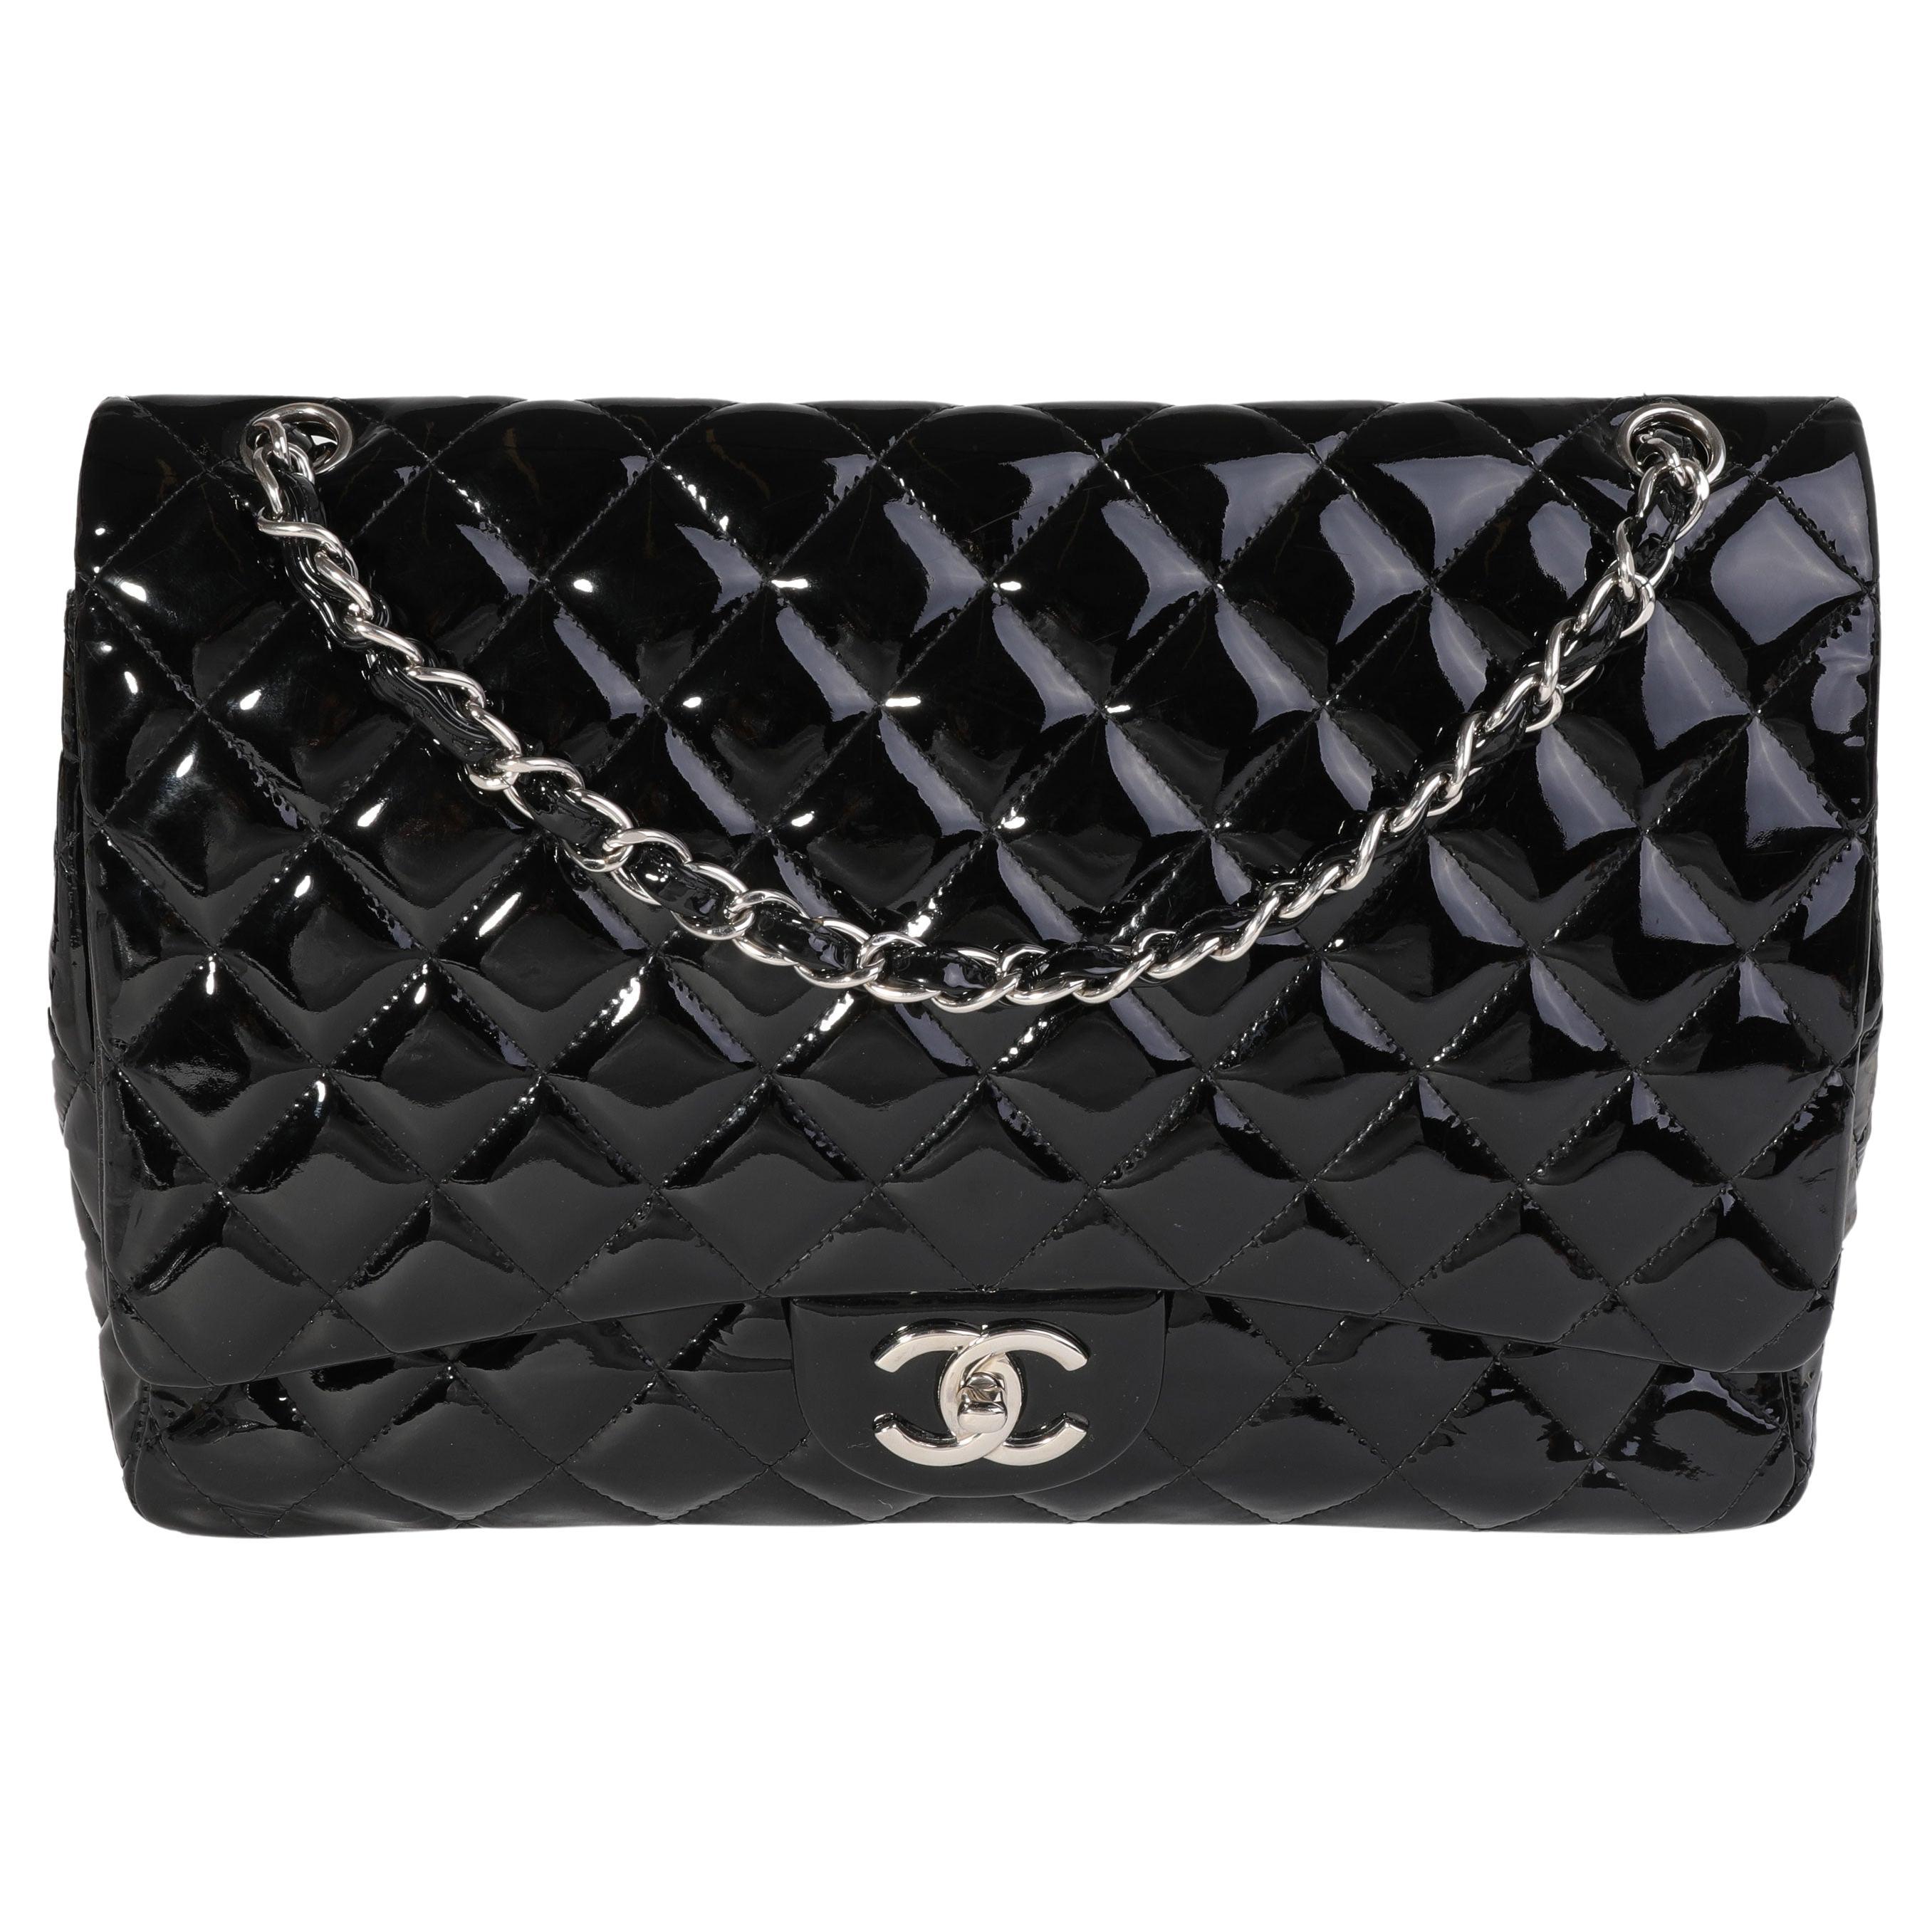 Chanel Bronze Striated Quilted Patent Leather Classic Maxi Double Flap Bag